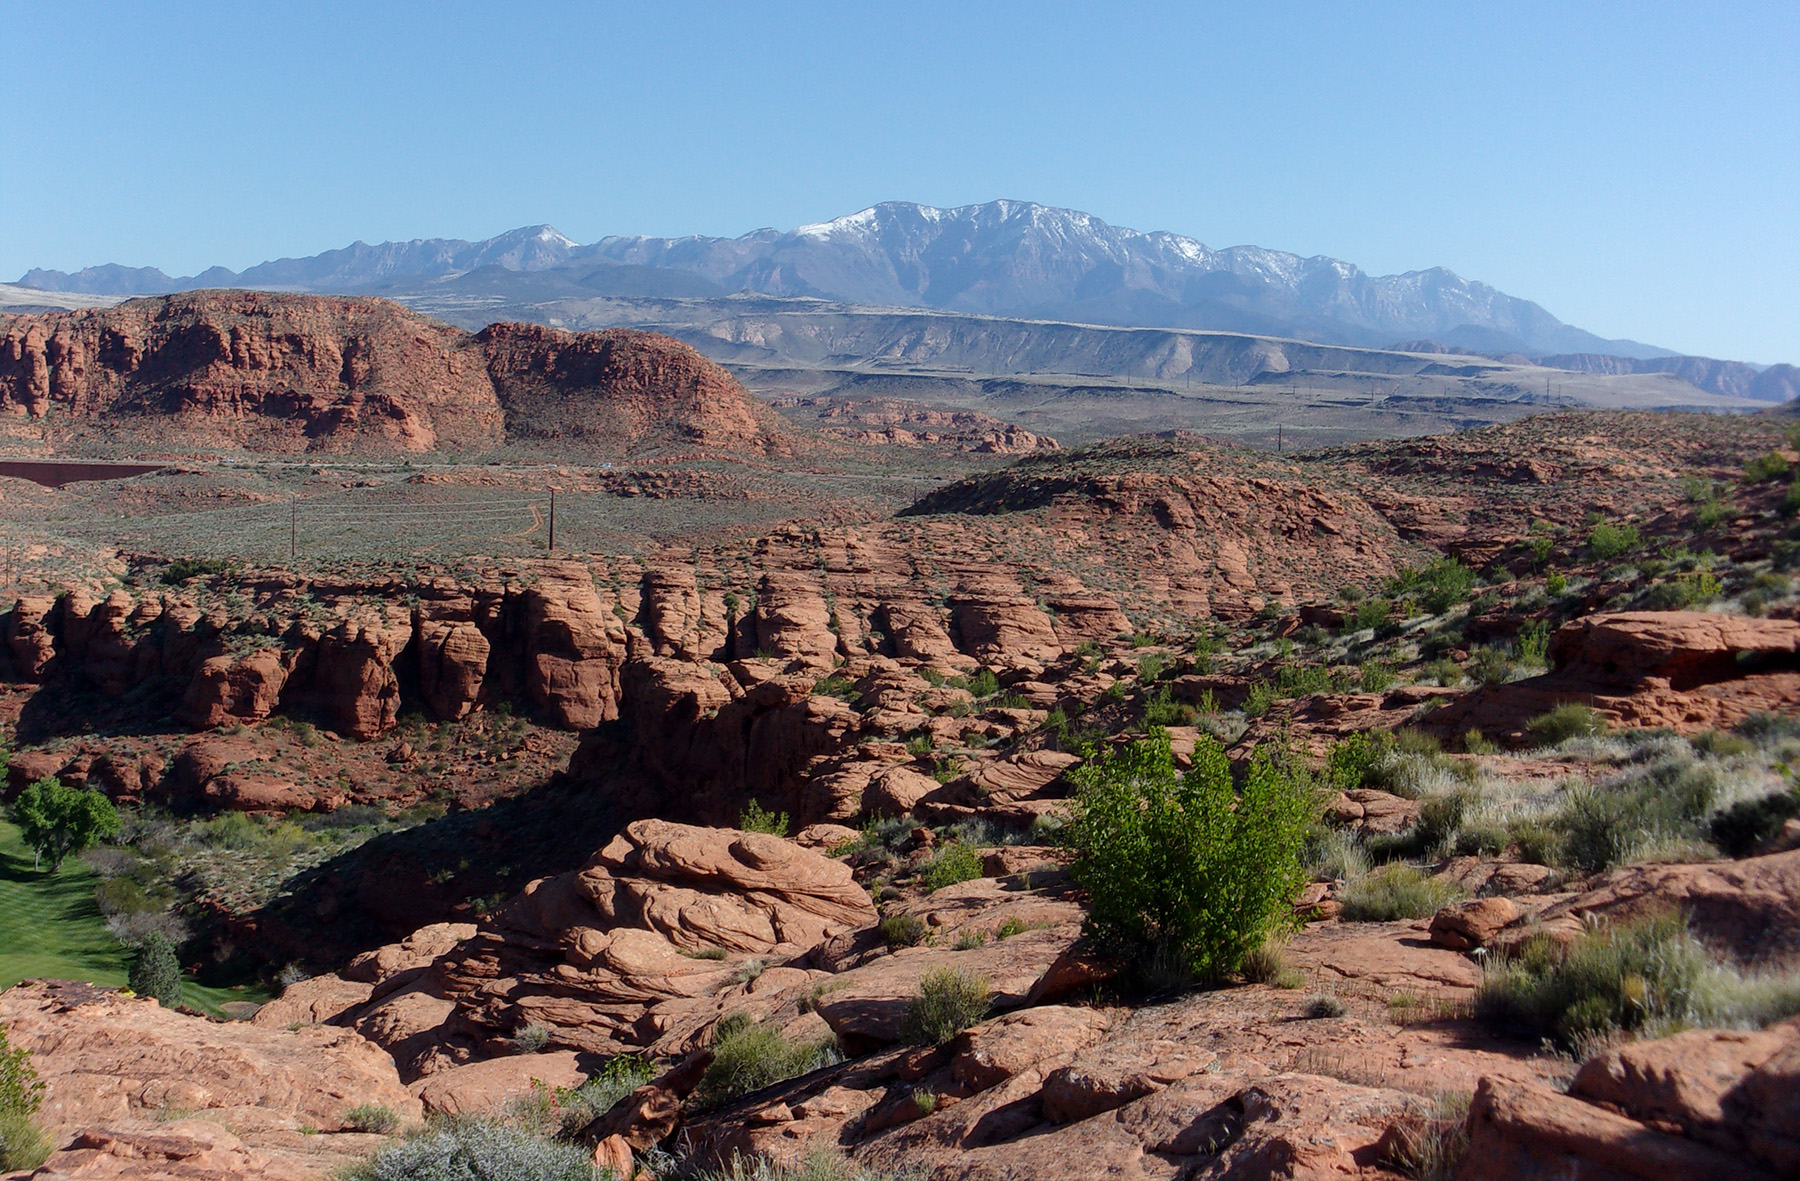 Owens Loop Trail, with the trailhead at Brooks Nature Park. Just north of downtown St. George, Owens Loop Trail begins within St. George city limits. It quickly enters the Red Cliffs Desert Reserve. The hike is free and no permit necessary